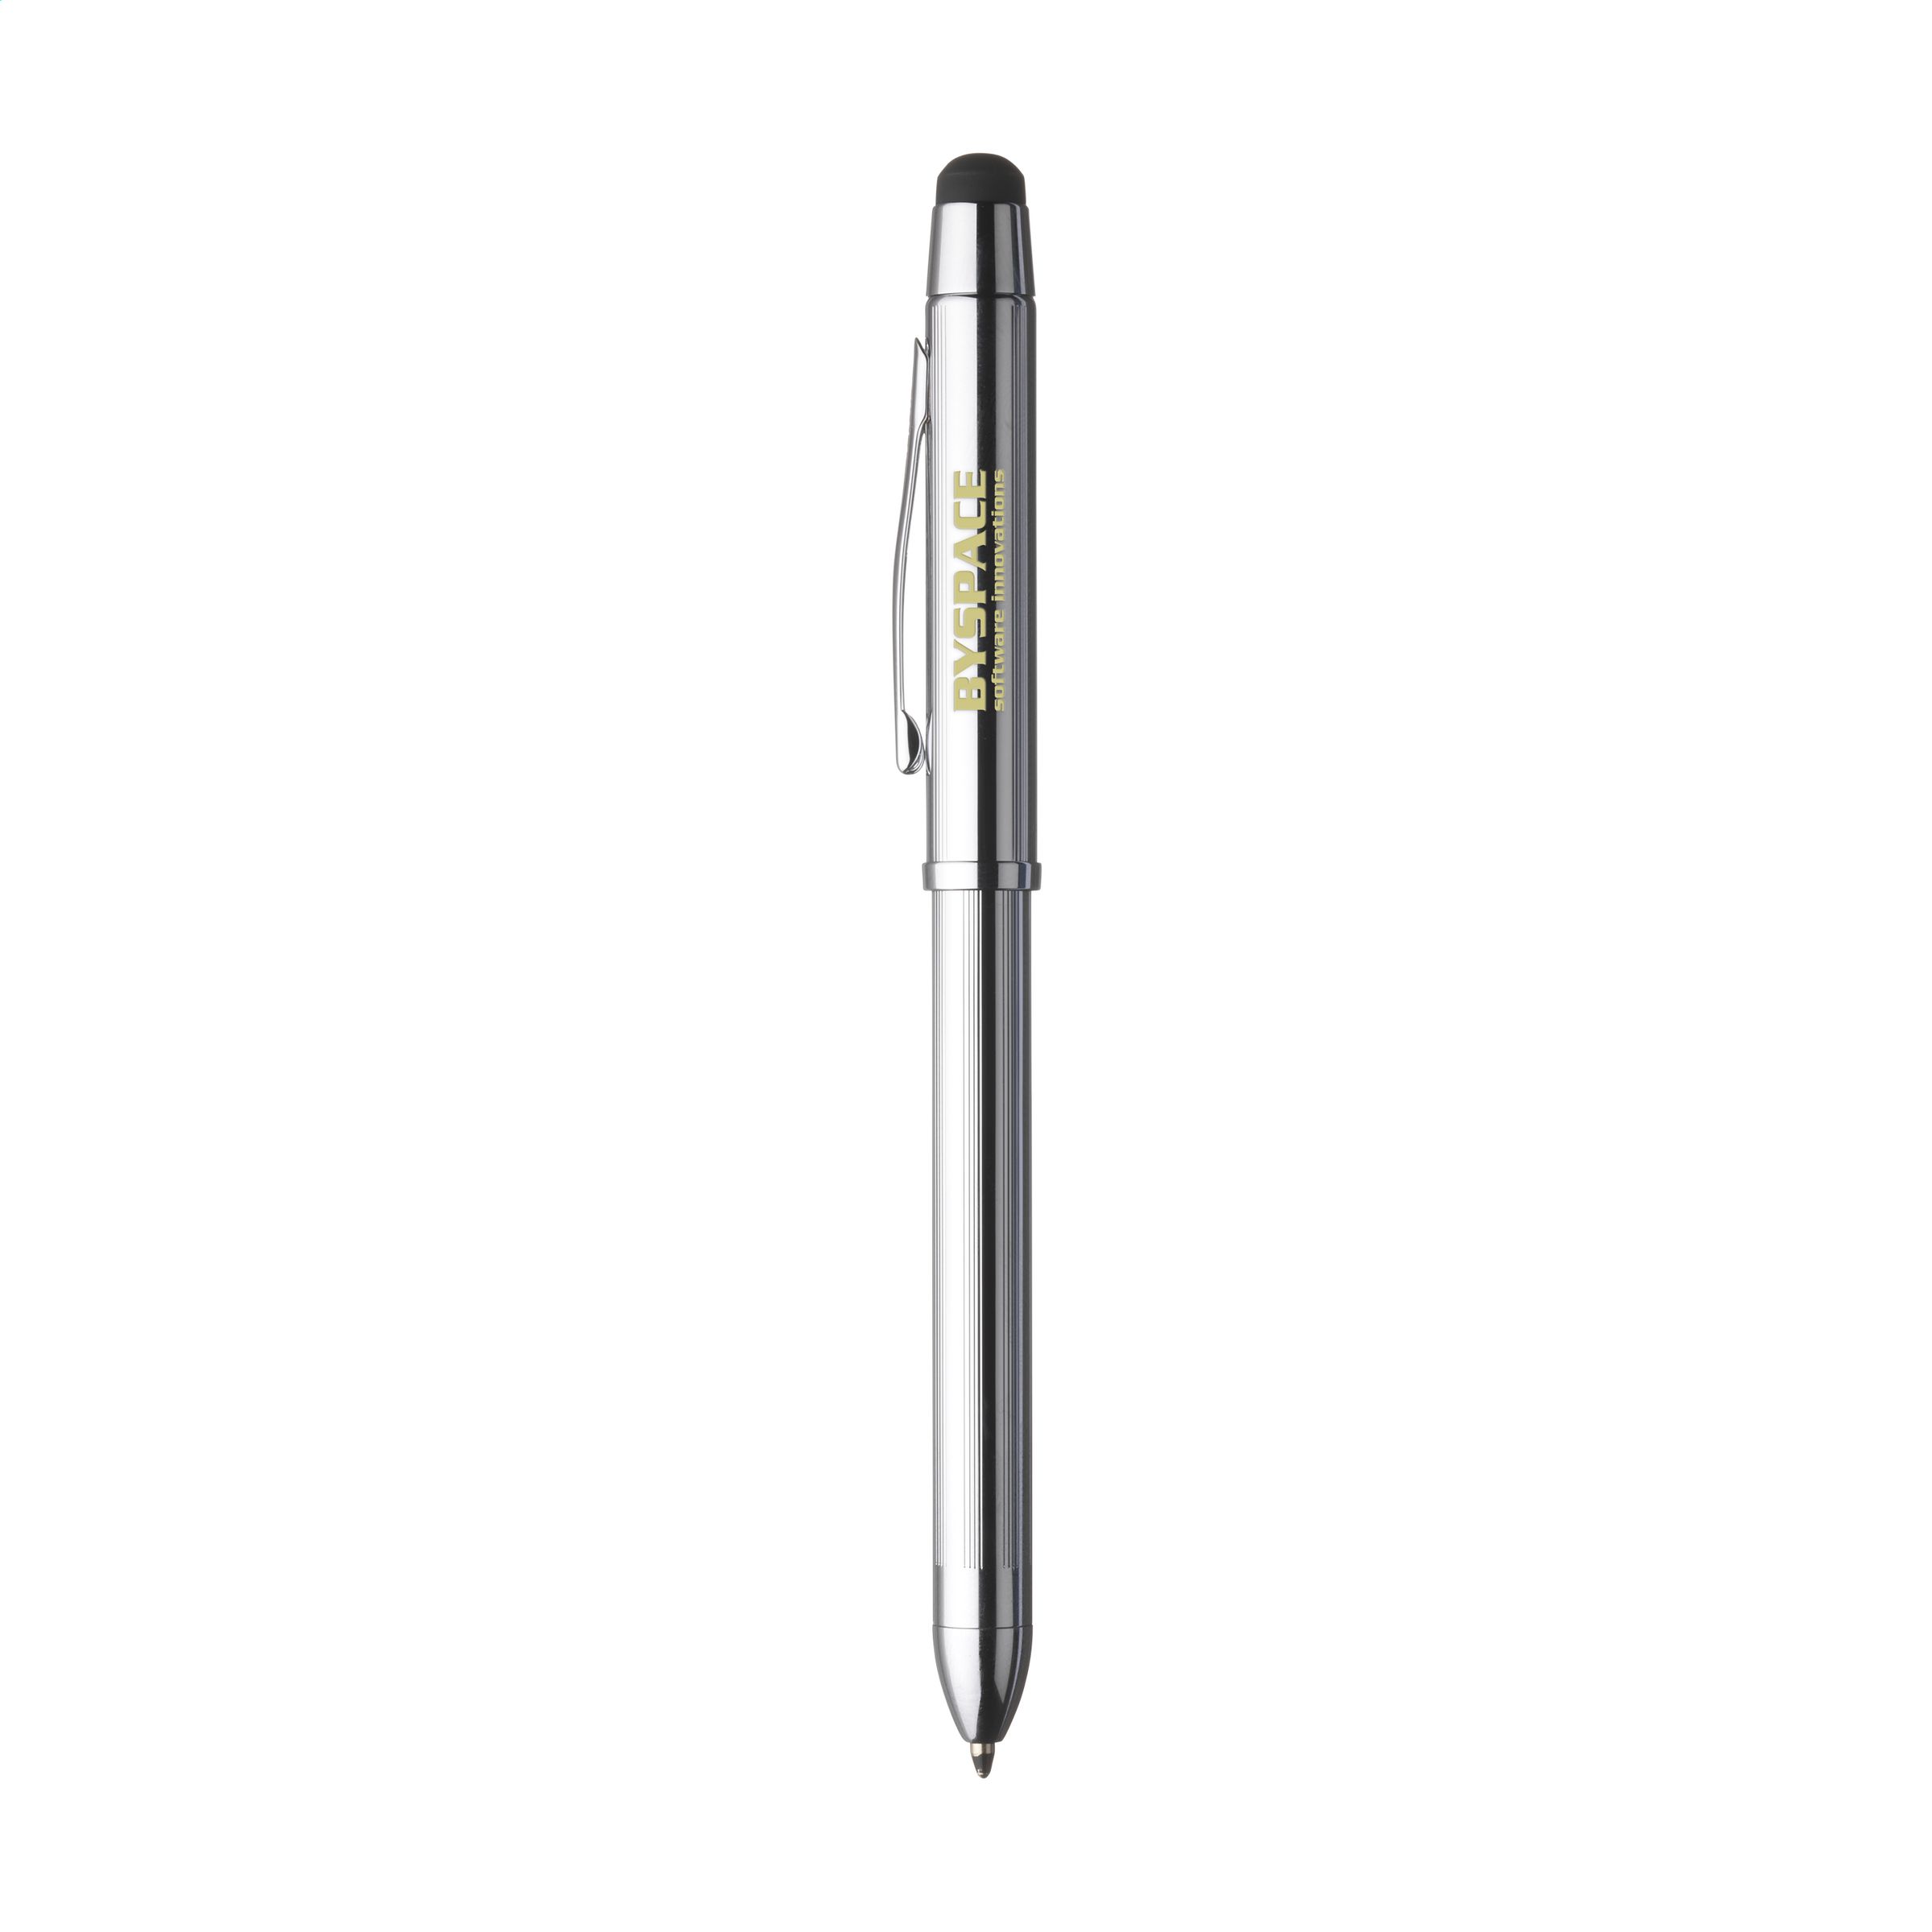 This is a cross multifunctional pen that is not only a ballpoint pen but also a refillable pencil. - Alderley Edge